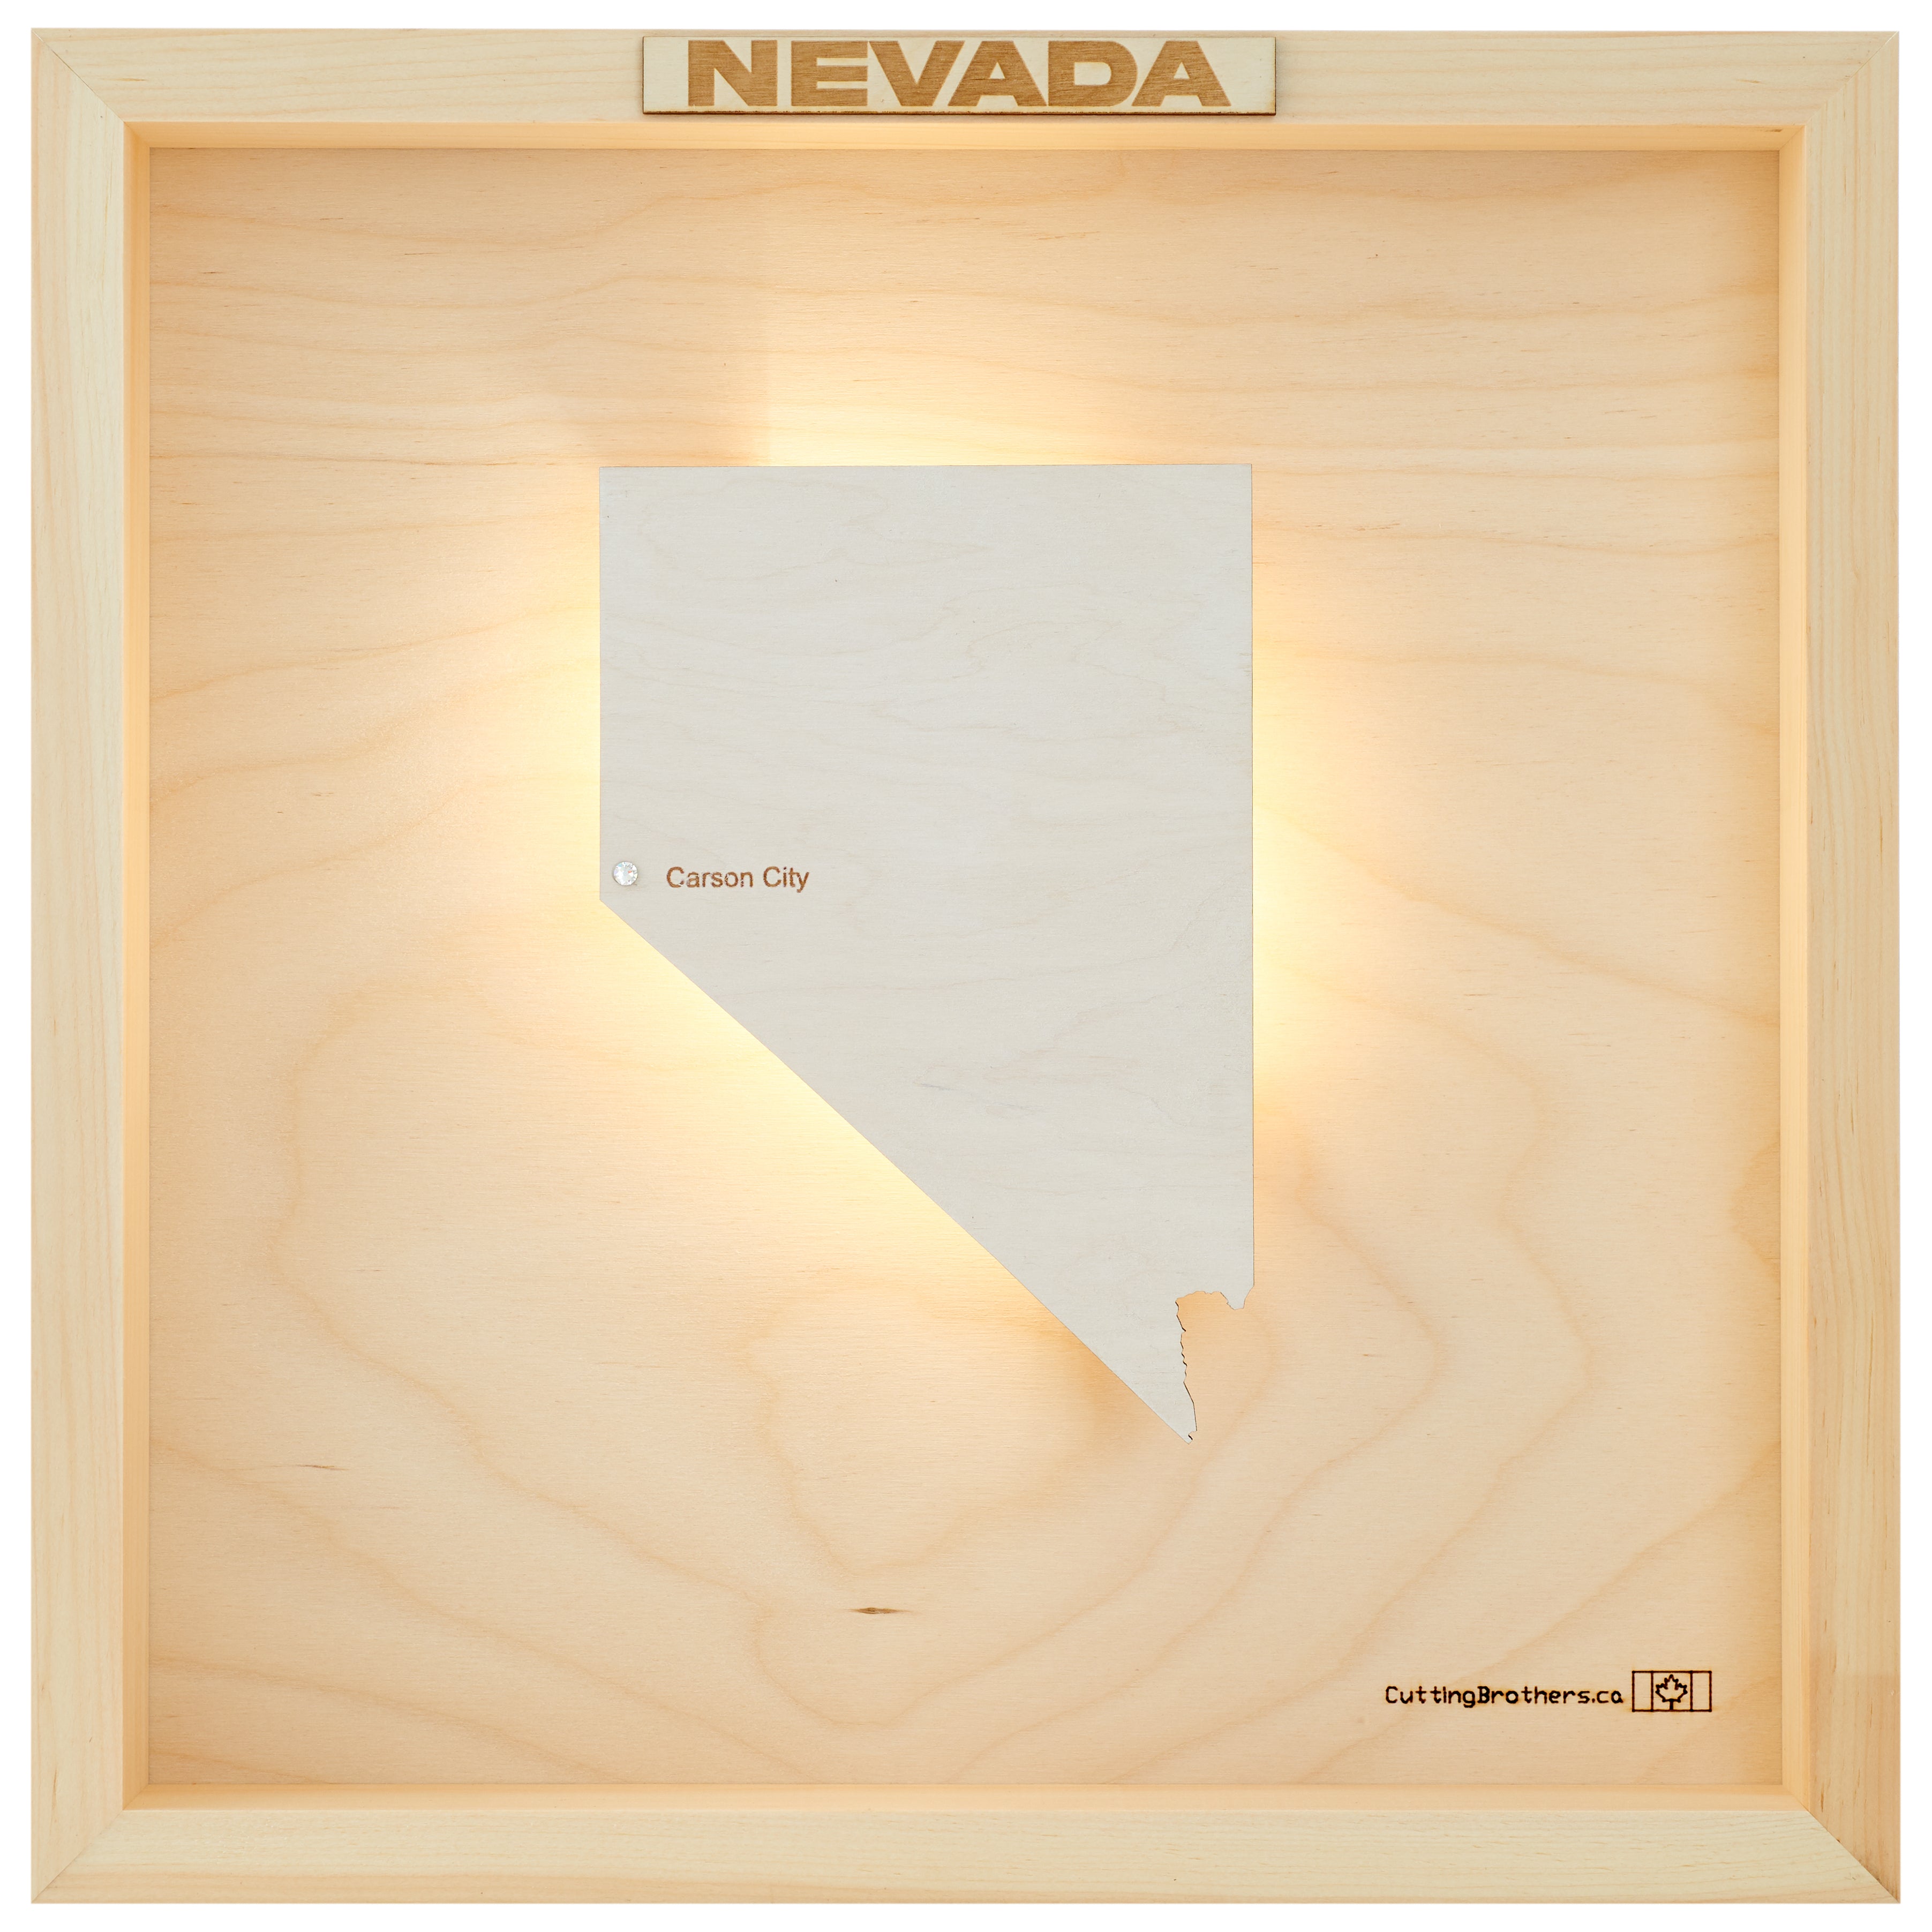 NEVADA 3D WOODEN WALL MAP - Version S